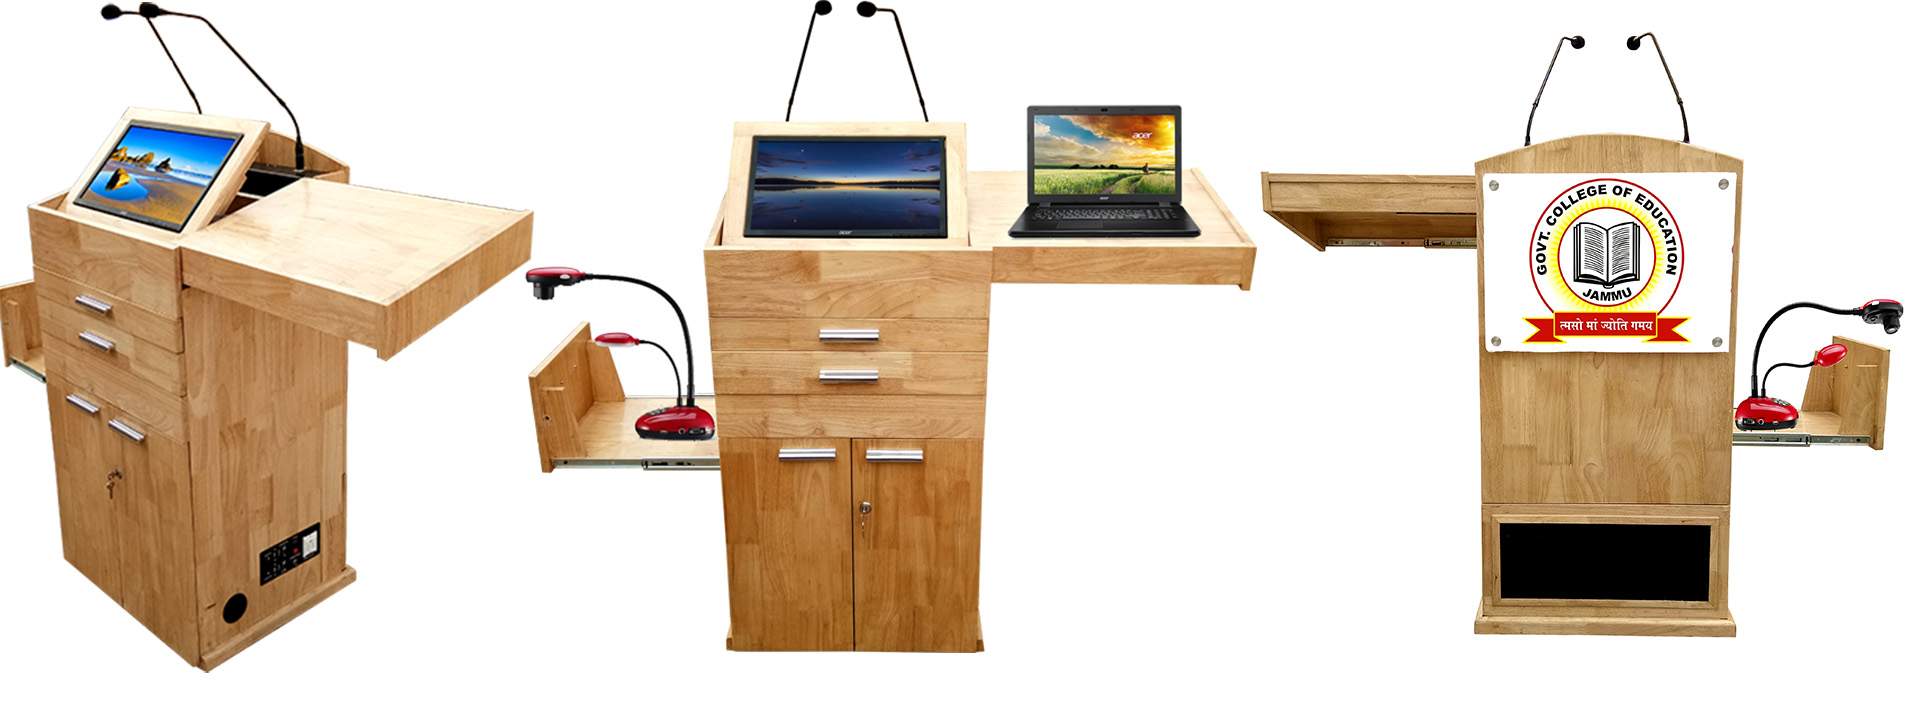 Smart Podium for Conference Room